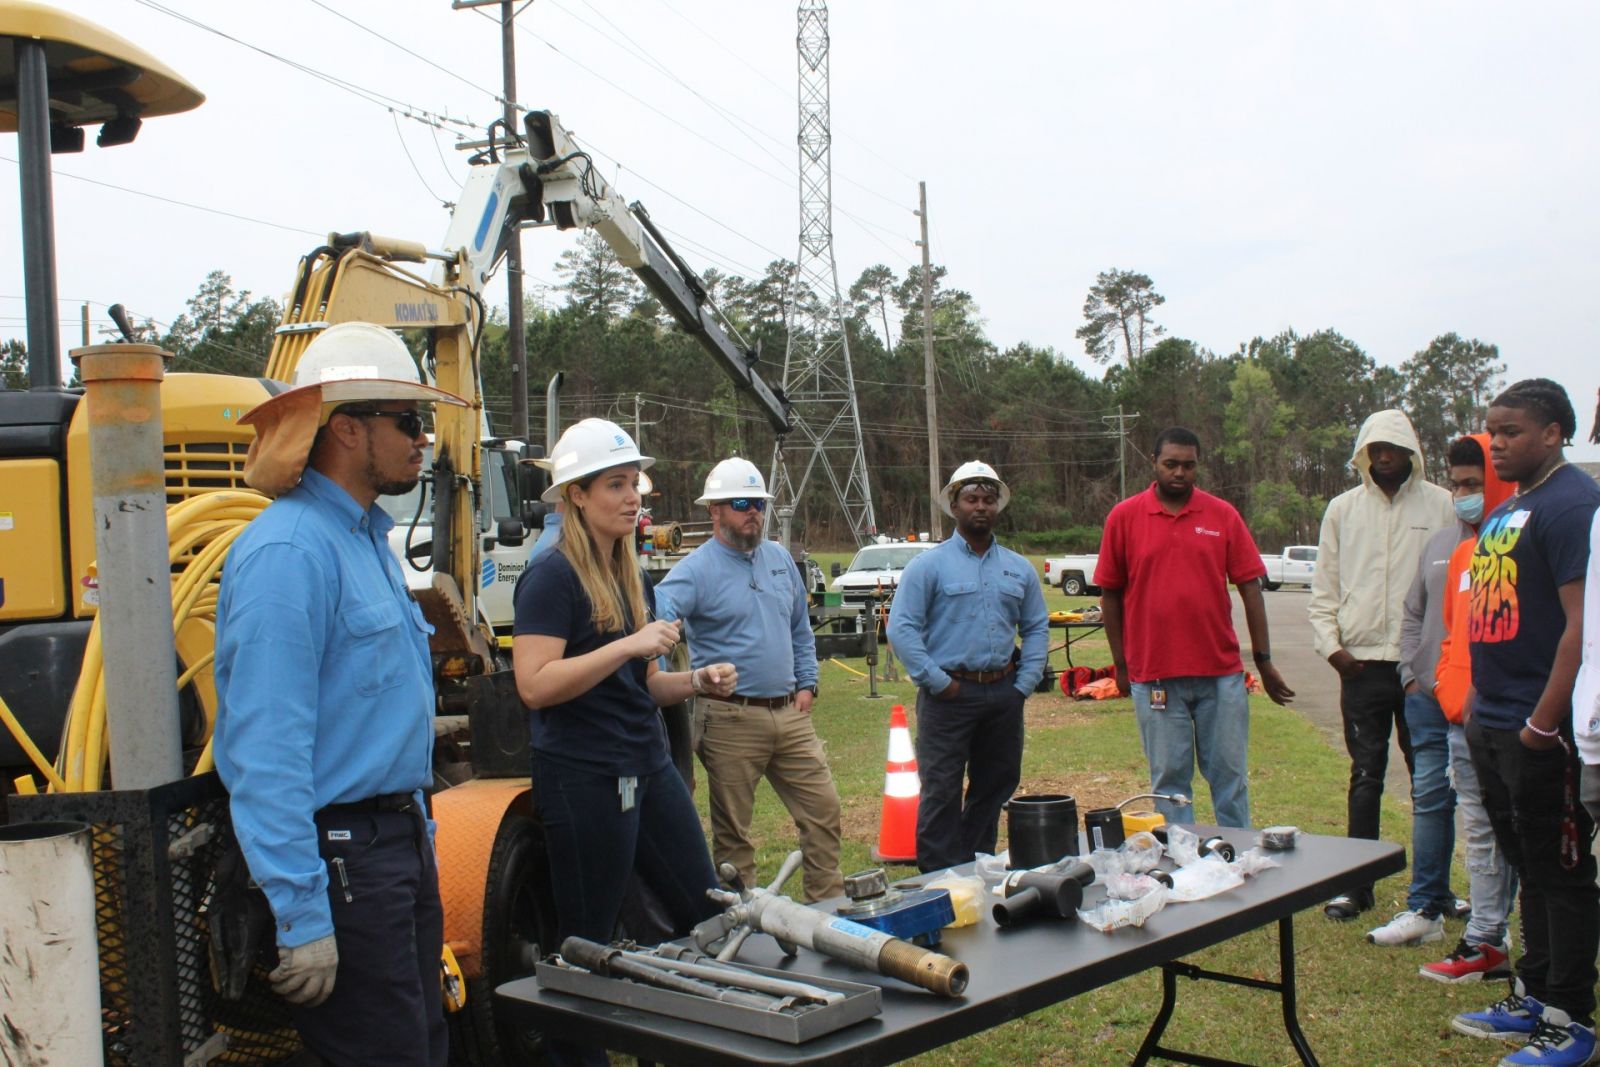 Dominion Energy gas operations employees explain their jobs and the equipment they use to students participating in the company's Skilled Craft Career Day on March 24 at Lake Murray Training Center. The event drew students from Richland, Fairfield and Orangeburg counties, who learned about utility industry careers. (Photo/Christina Lee Knauss)